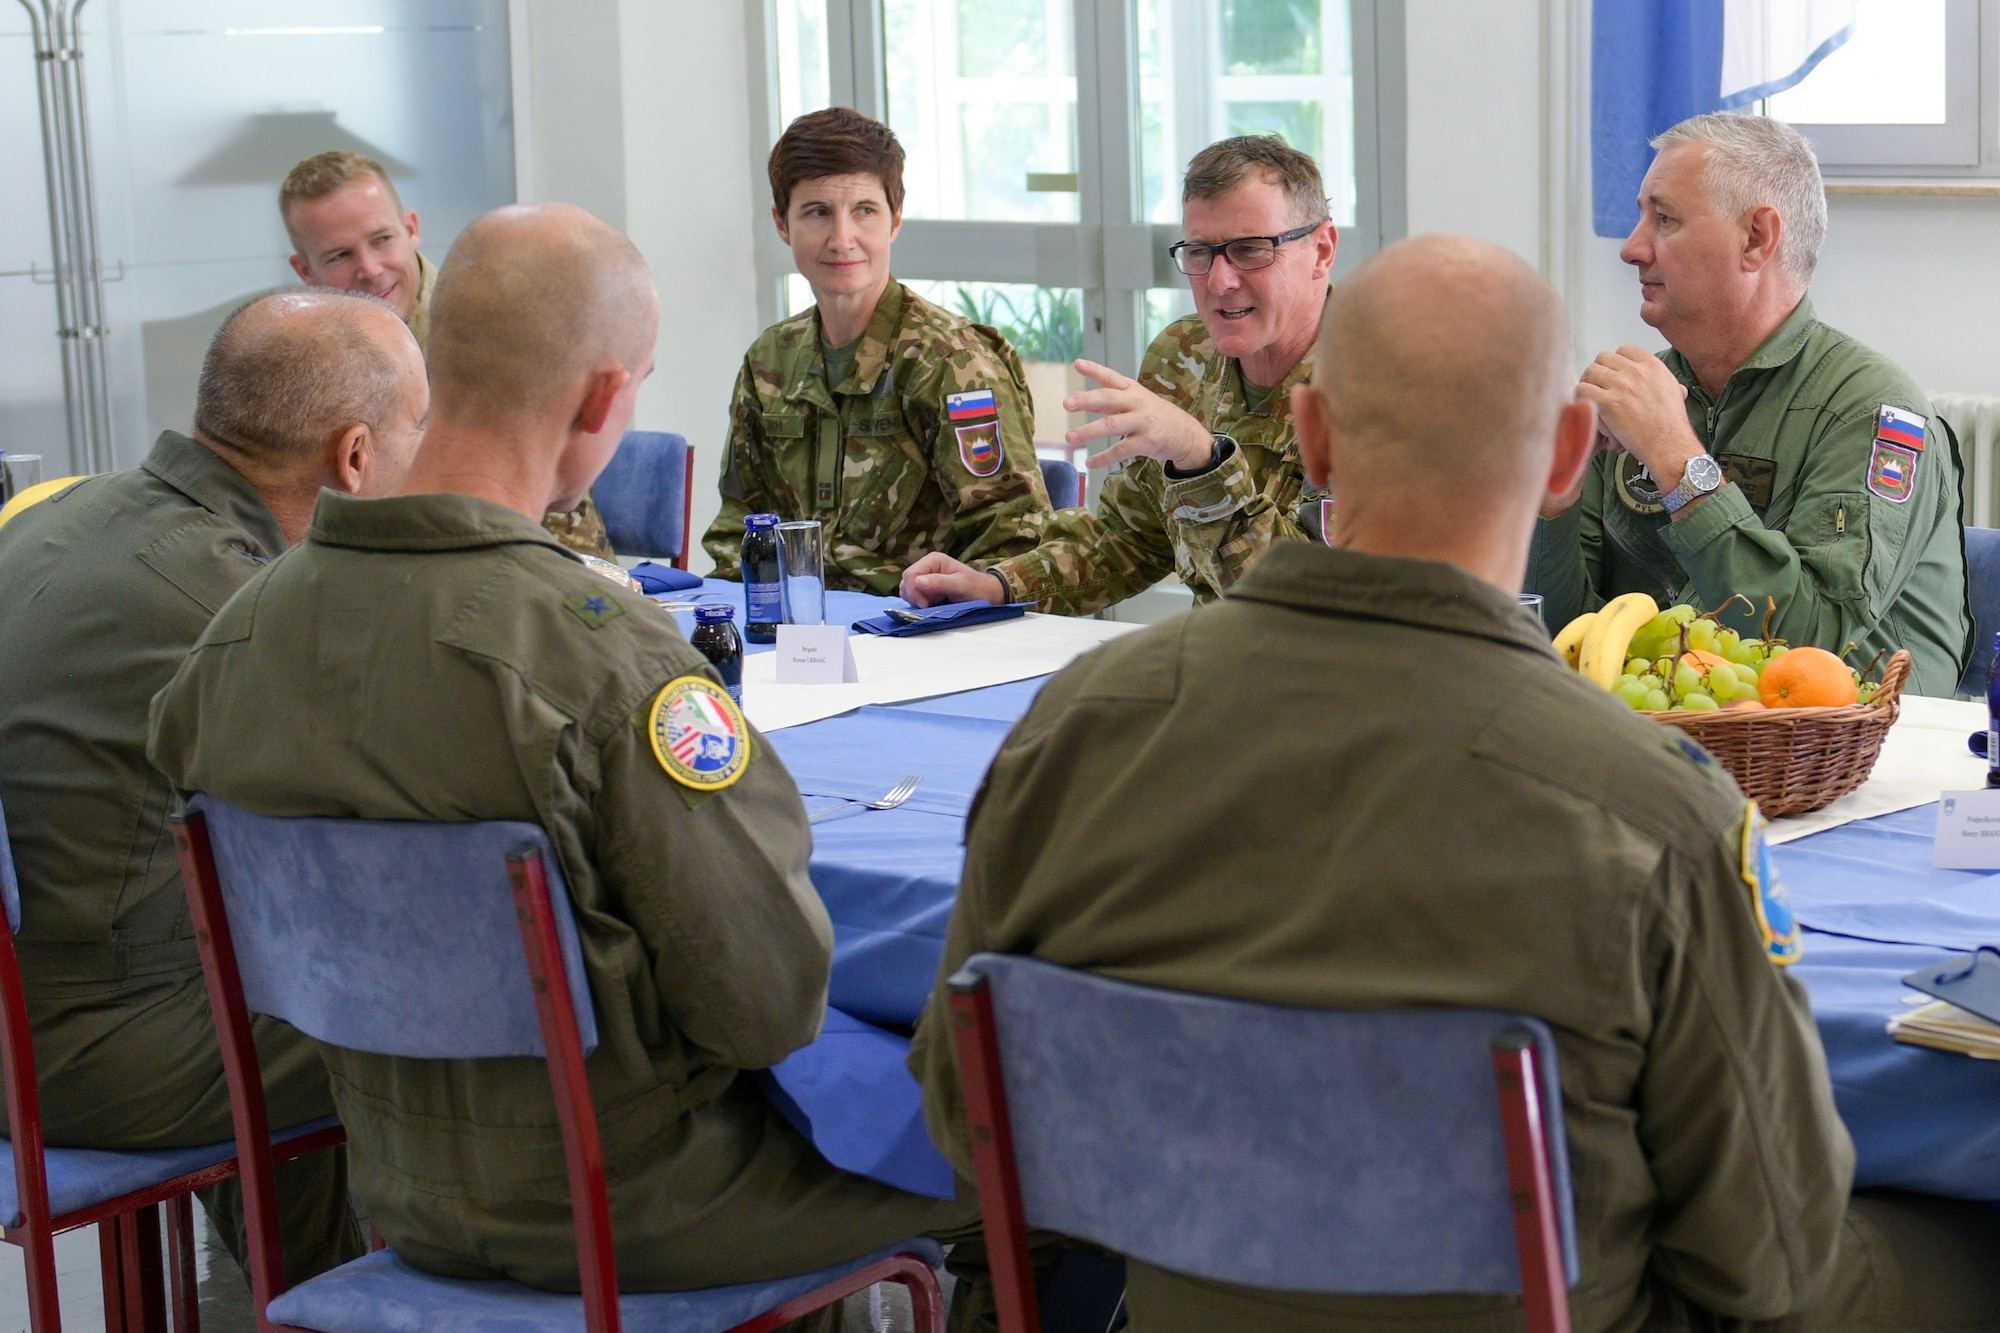 BG Roman Urbanč, deputy chief of the general staff of the Slovenian armed forces, speaks with U.S. Air Force Brig. Gen. Jason E. Bailey, 31st Fighter Wing commander, middle, and U.S. Air Force Gen. Jeff Harrigian, U.S. Air Forces in Europe and Air Forces Africa commander, left, at Cerklje ob Krki Air Base, Slovenia, Sept. 9, 2021. The visit highlighted bilateral operations and interoperability between U.S. and Slovenian Armed Forces in support of the NATO Agile Combat Employment concept. The ACE concept is intended to ensure USAFE-AFAFRICA forces are ready for potential threats and contingencies by enabling forces to quickly disperse and continue to deliver air power from locations with varying levels of capacity and support.